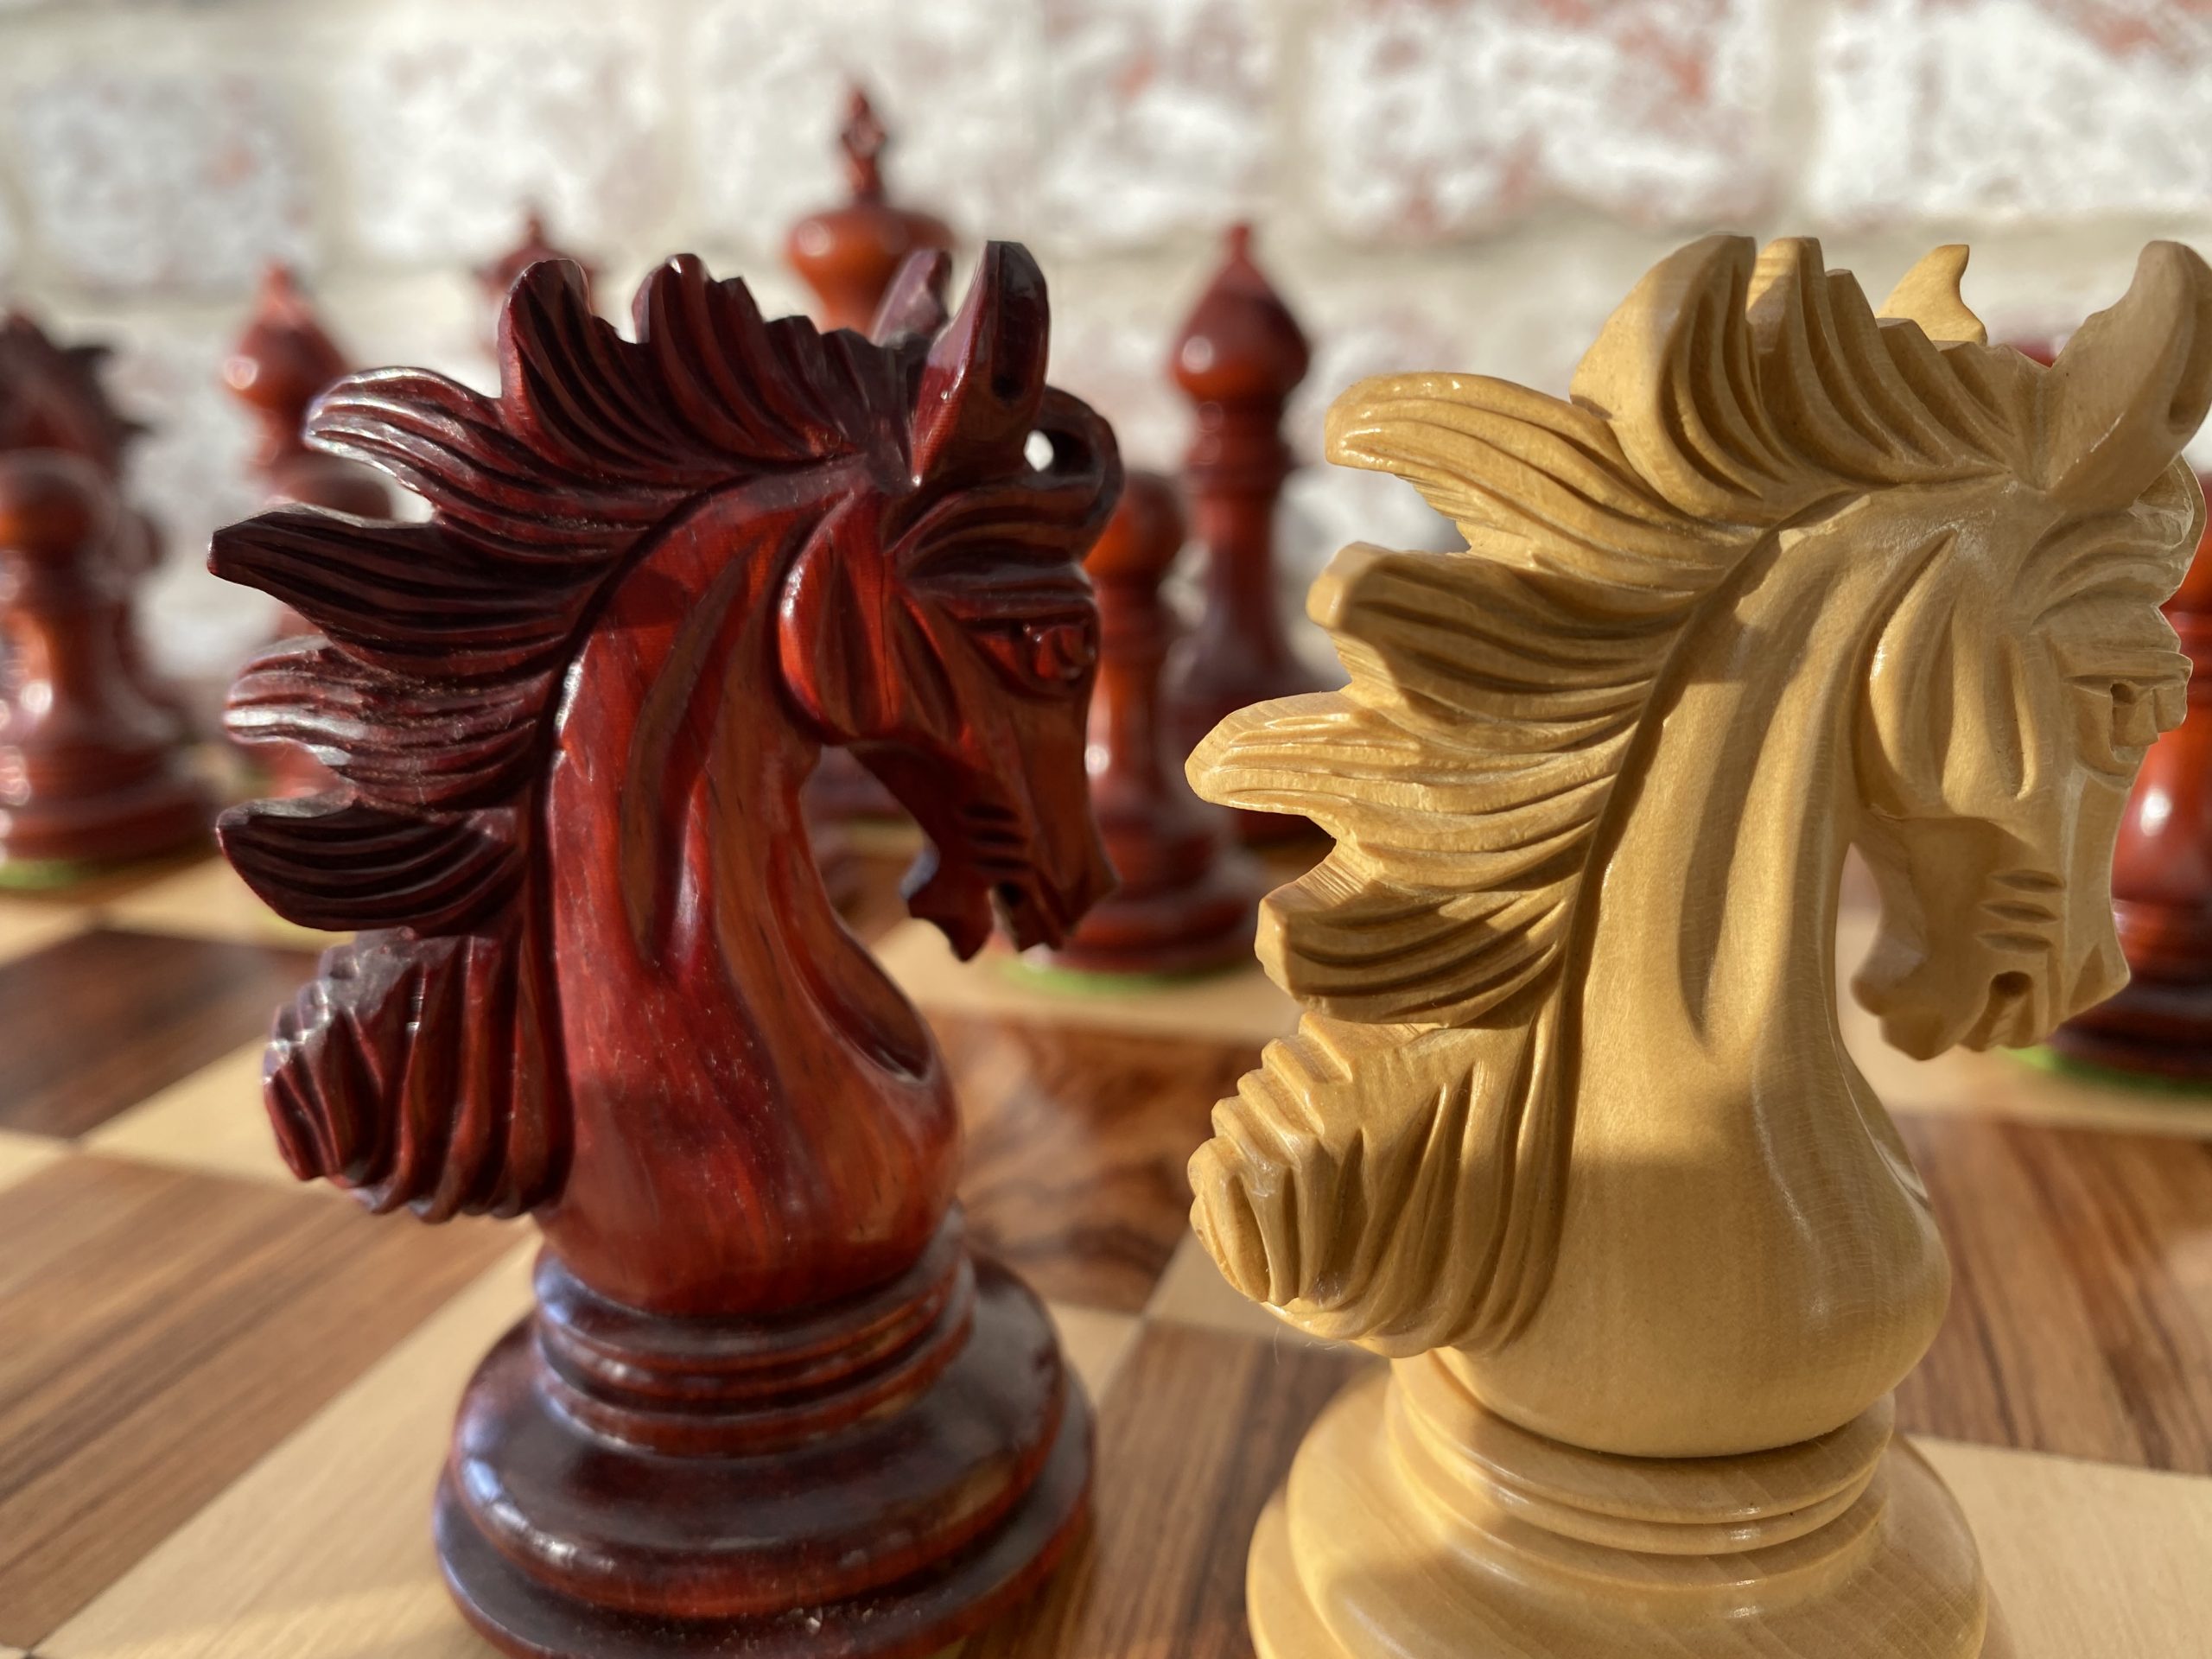 The Arabian - Triple Weighted Ebony Chess Pieces - ChessBaron Chess Sets  USA - Call (213) 325 6540